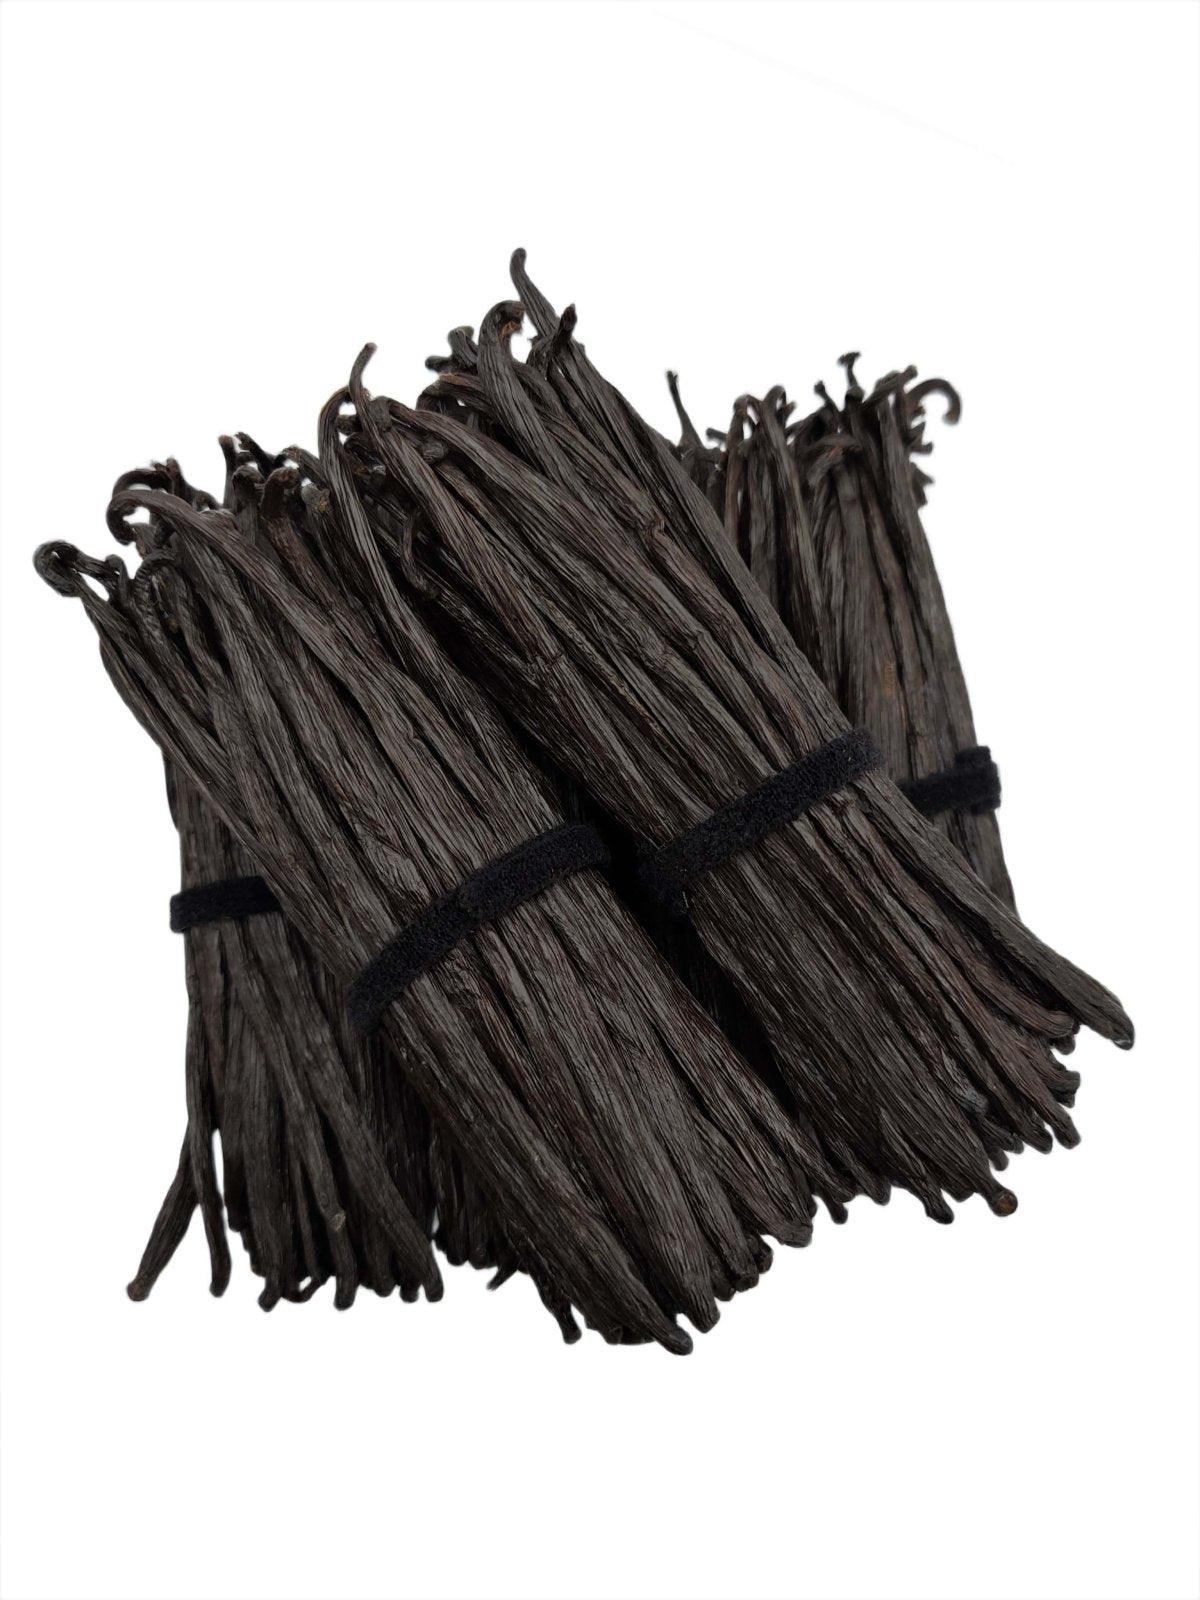 Tahitian Gourmet Grade-A Vanilla Beans<br>For Extract And Baking<BR>1/4 lb, 1/2 lb, 1 lb, 2 lb - Spice-Land Wholesale